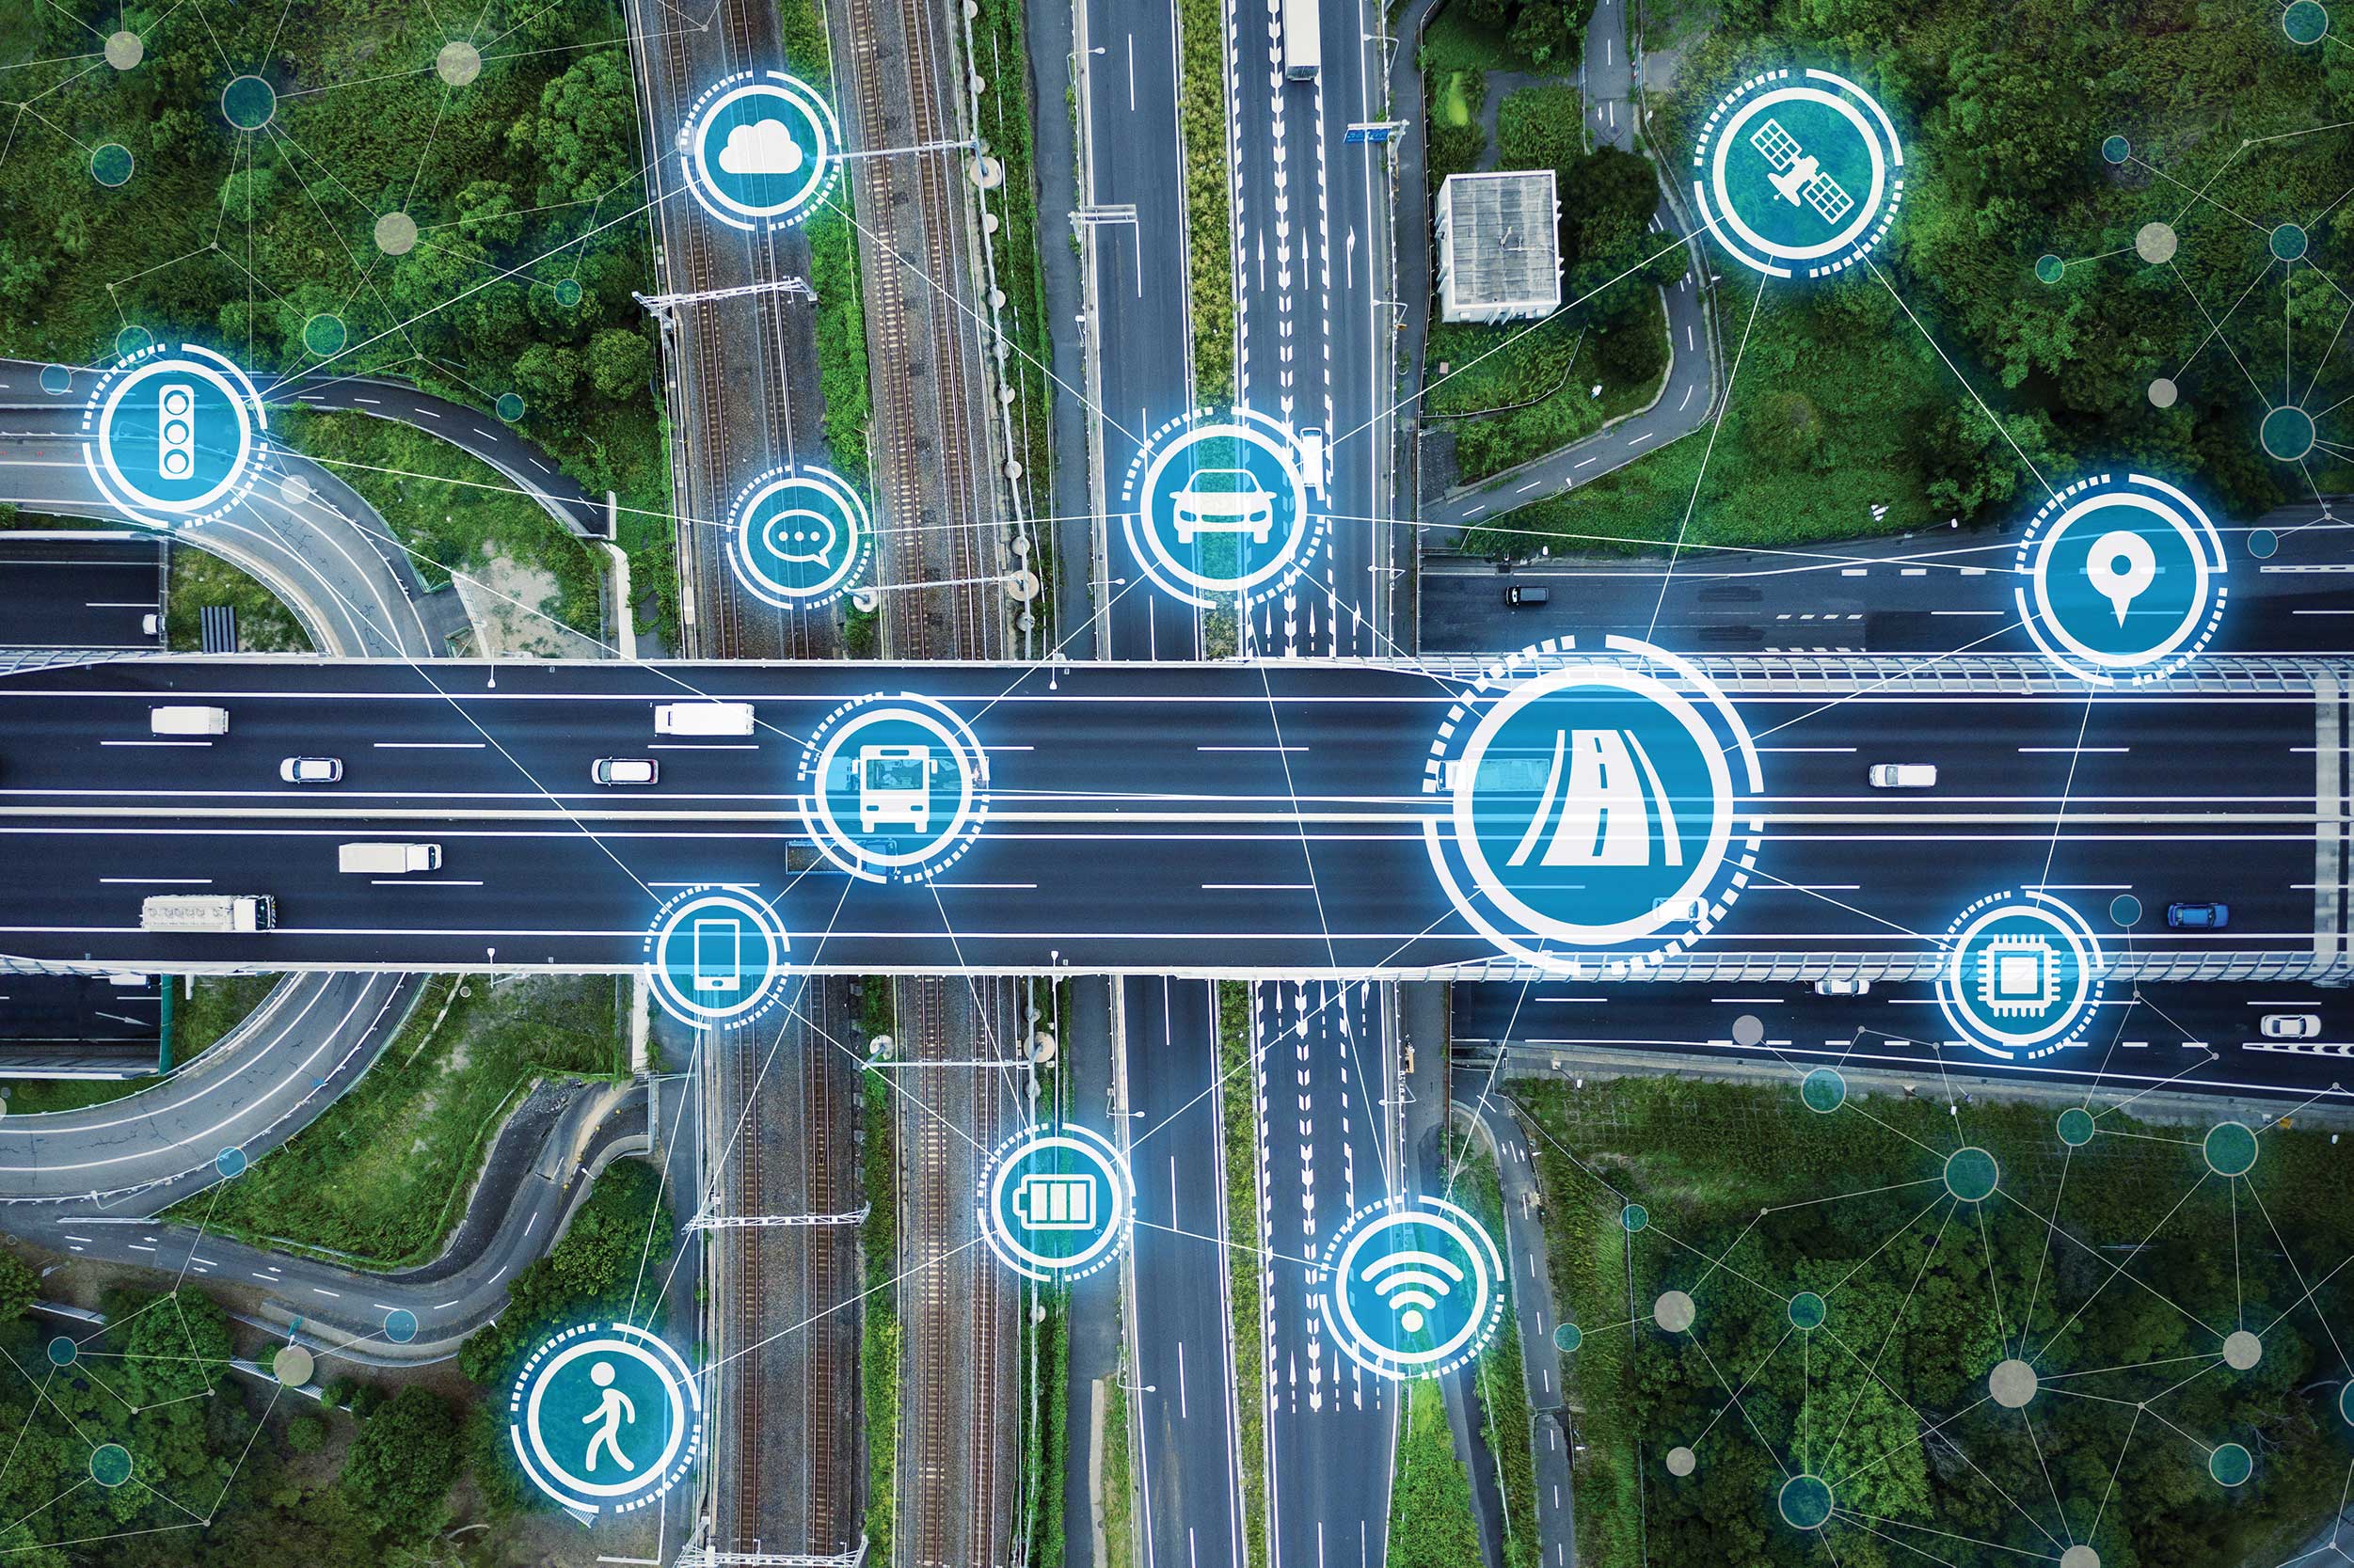 Stylized stock aerial view of a motorway intersection superimposed with connectivity icons, such as wifi and speech bubbles